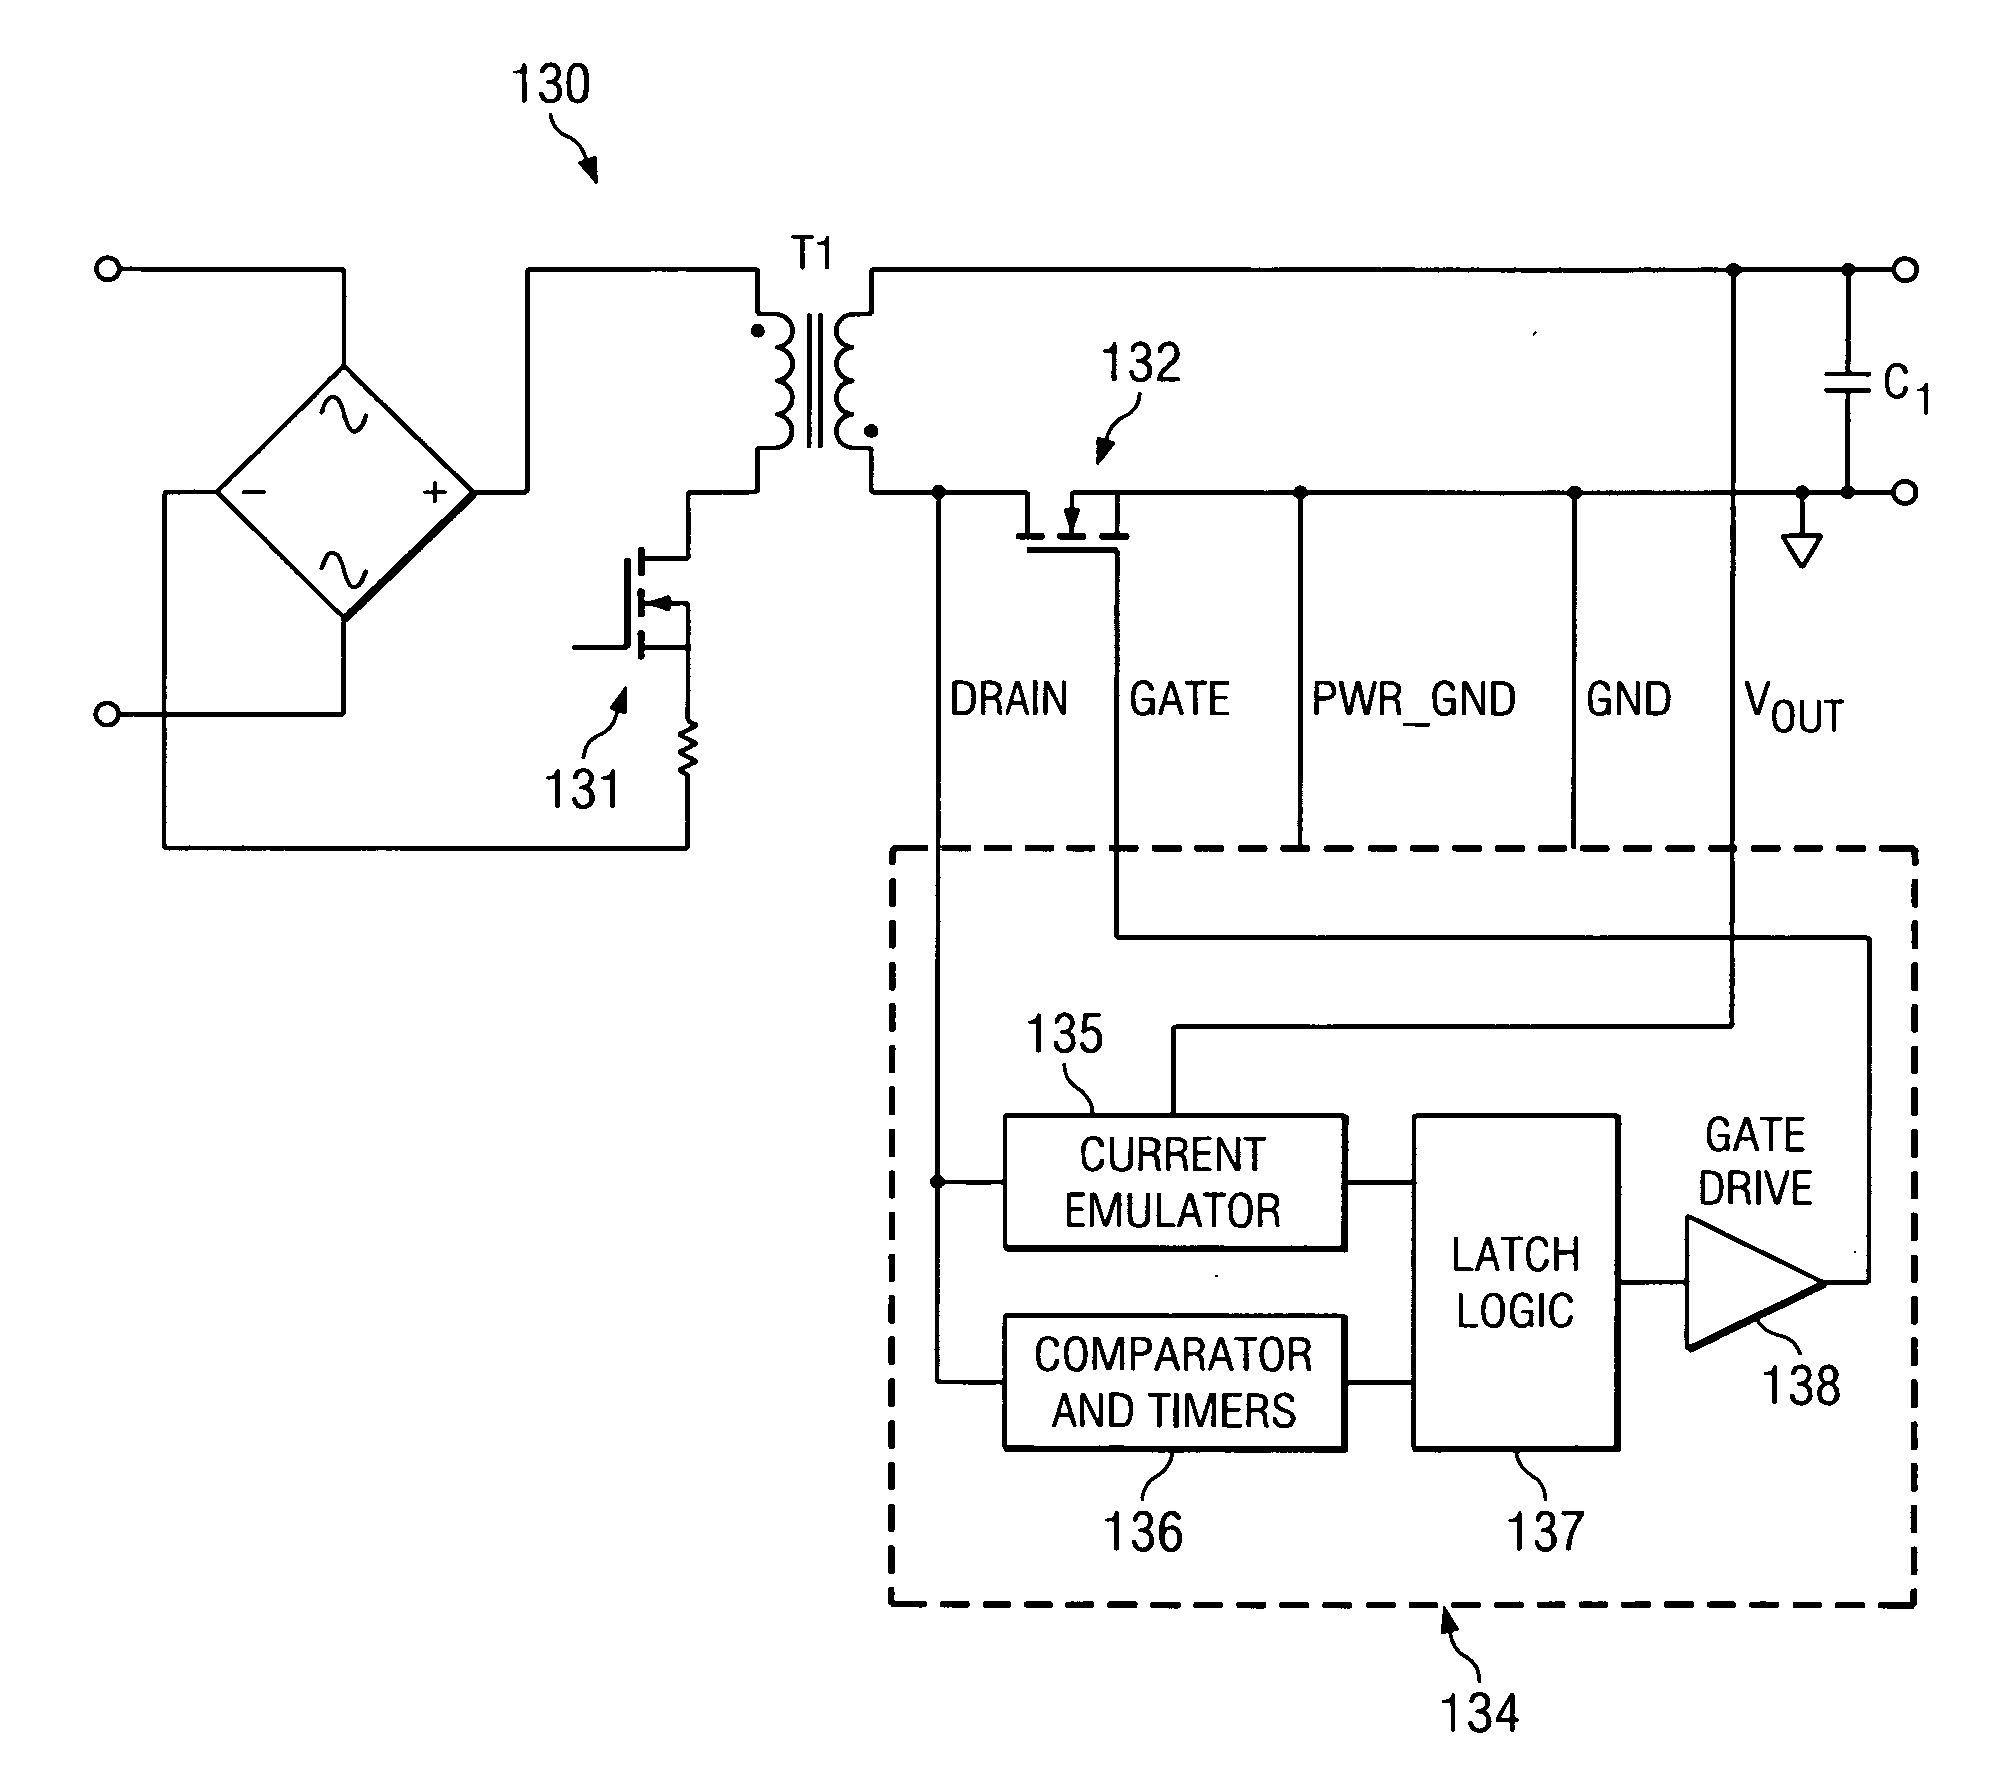 System and method for synchronous rectifier drive that enables converters to operate in transition and discontinuous mode